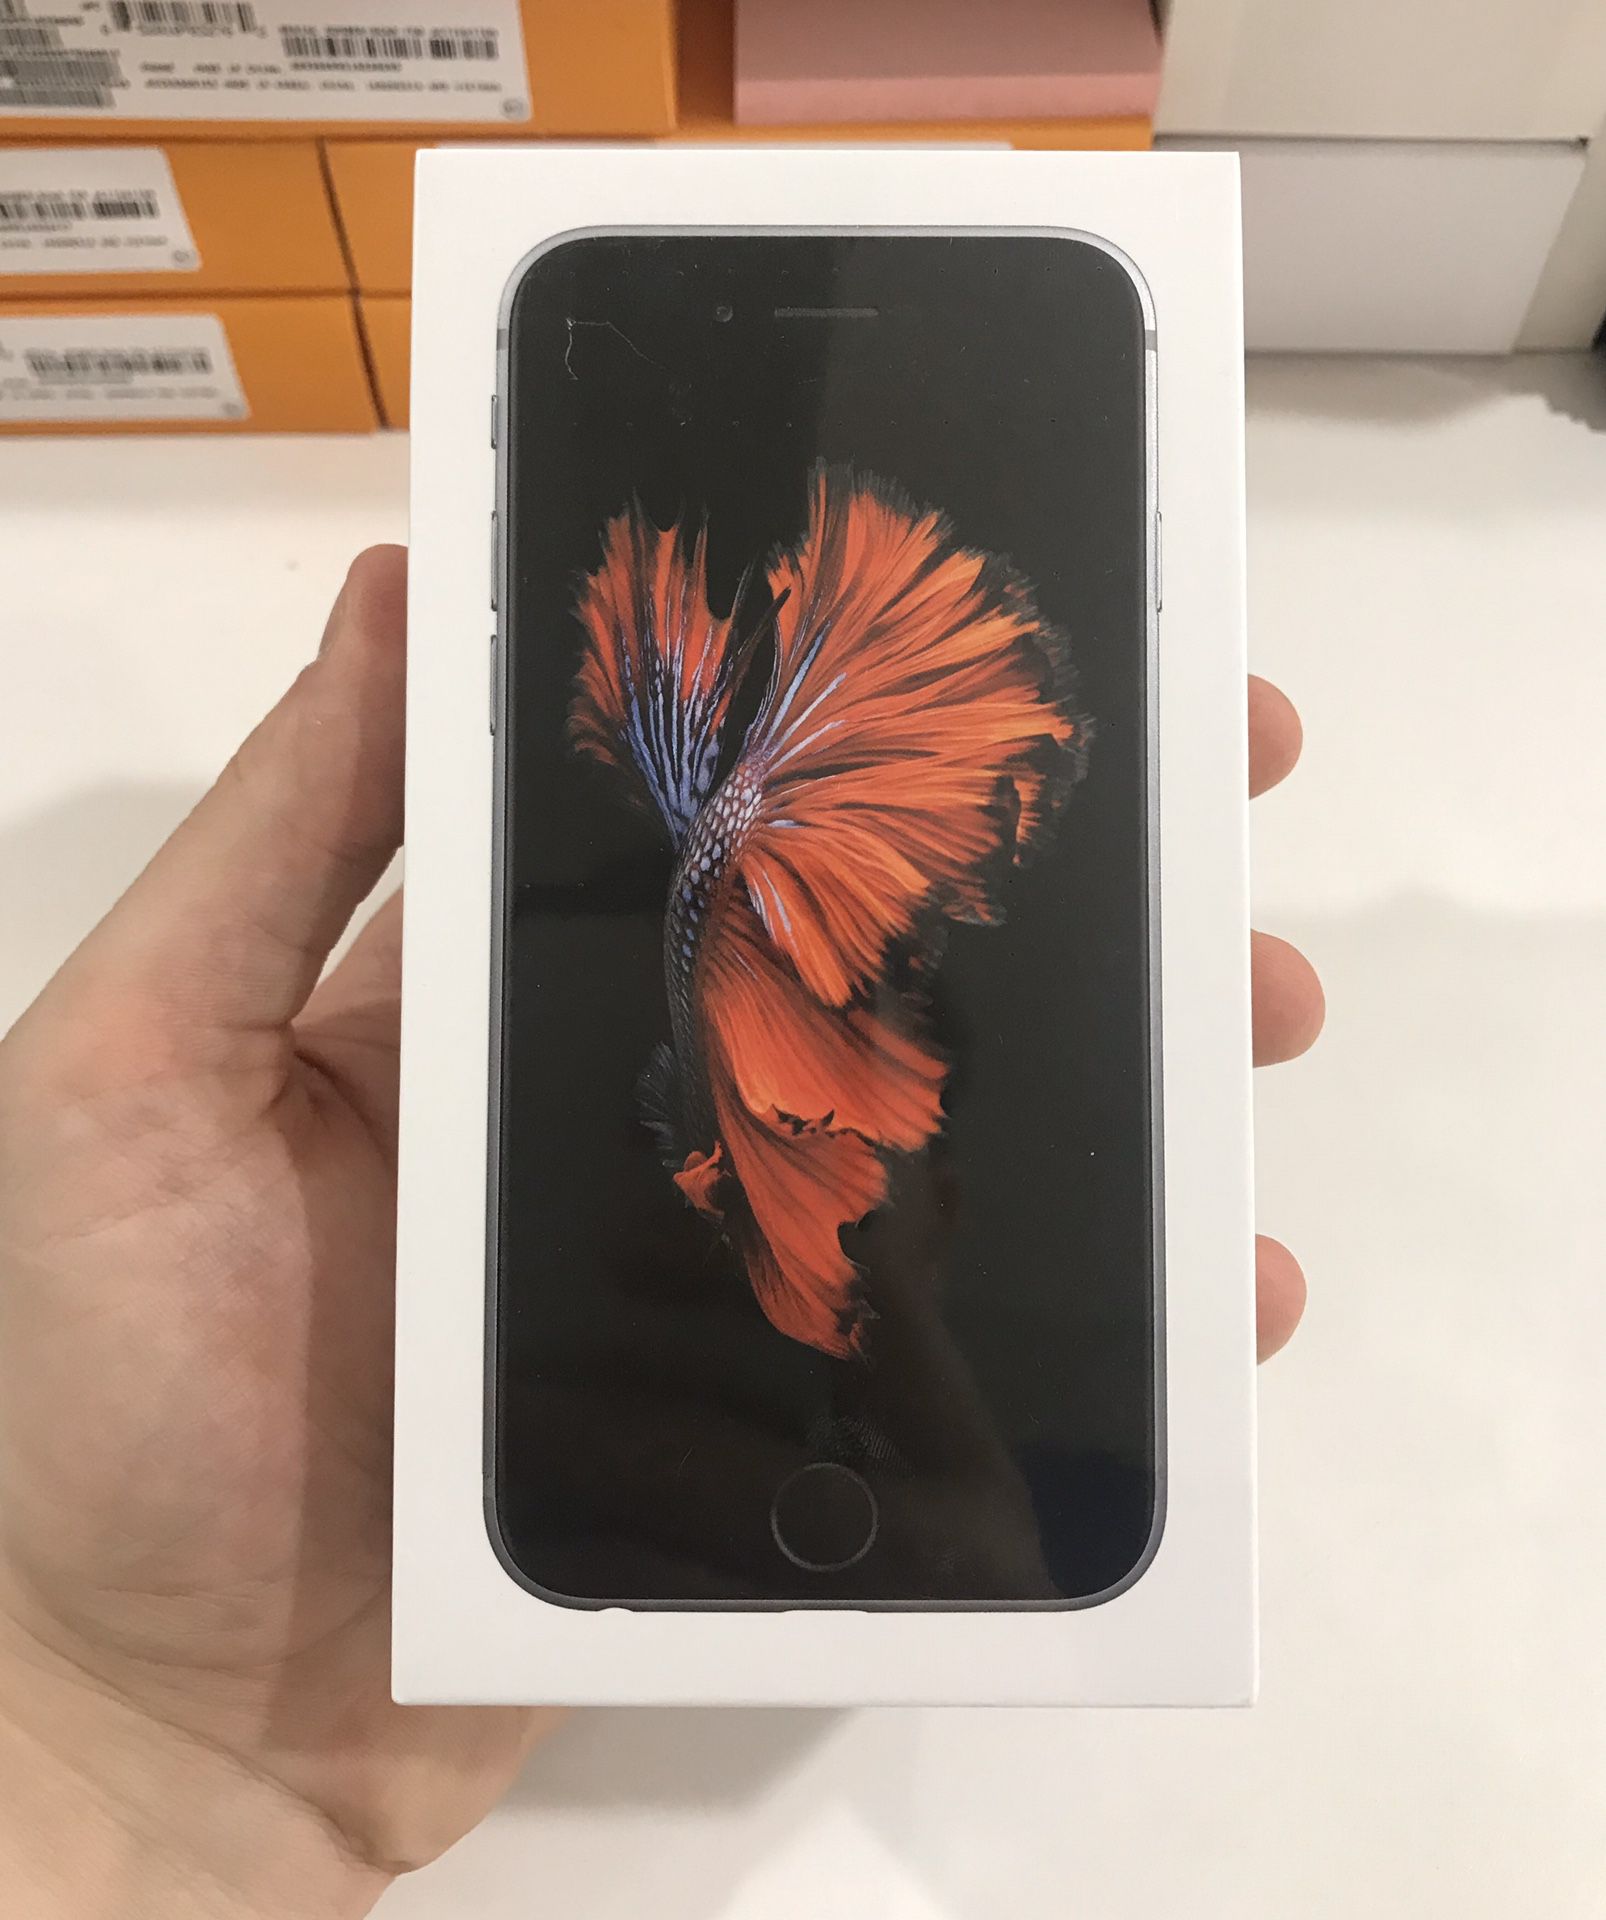 New iPhone 6S 32gb Only $25 when you switch to Boost Mobile